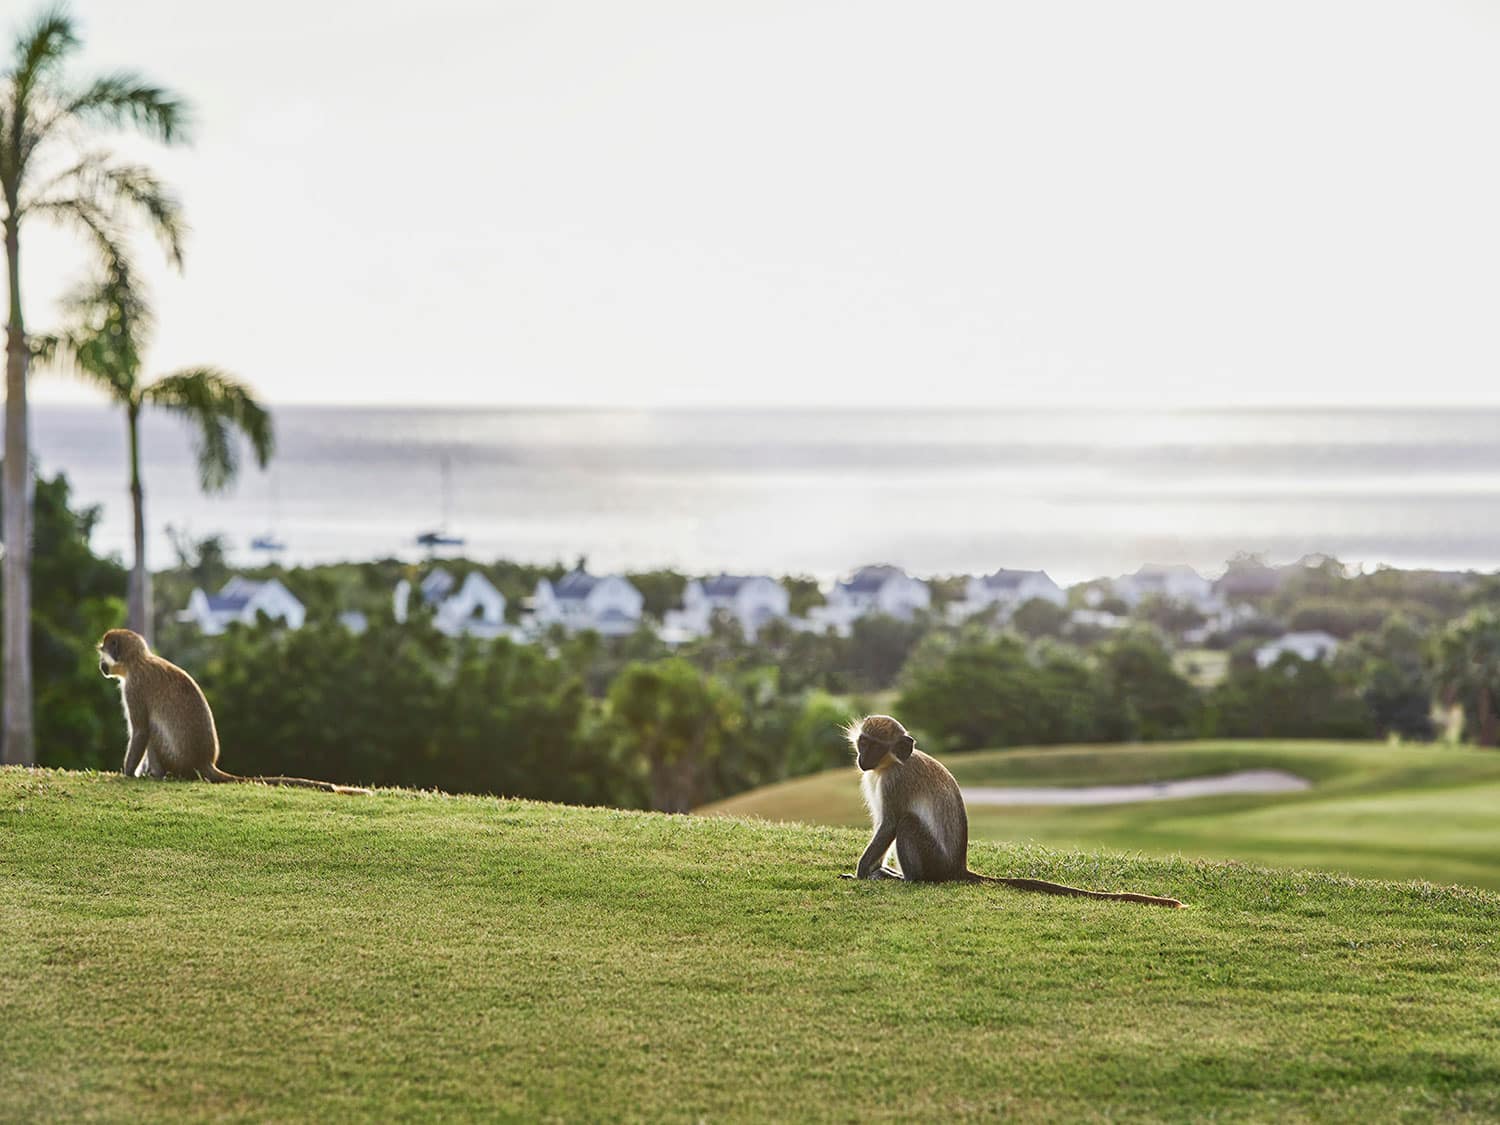 Monkeys on the golf course